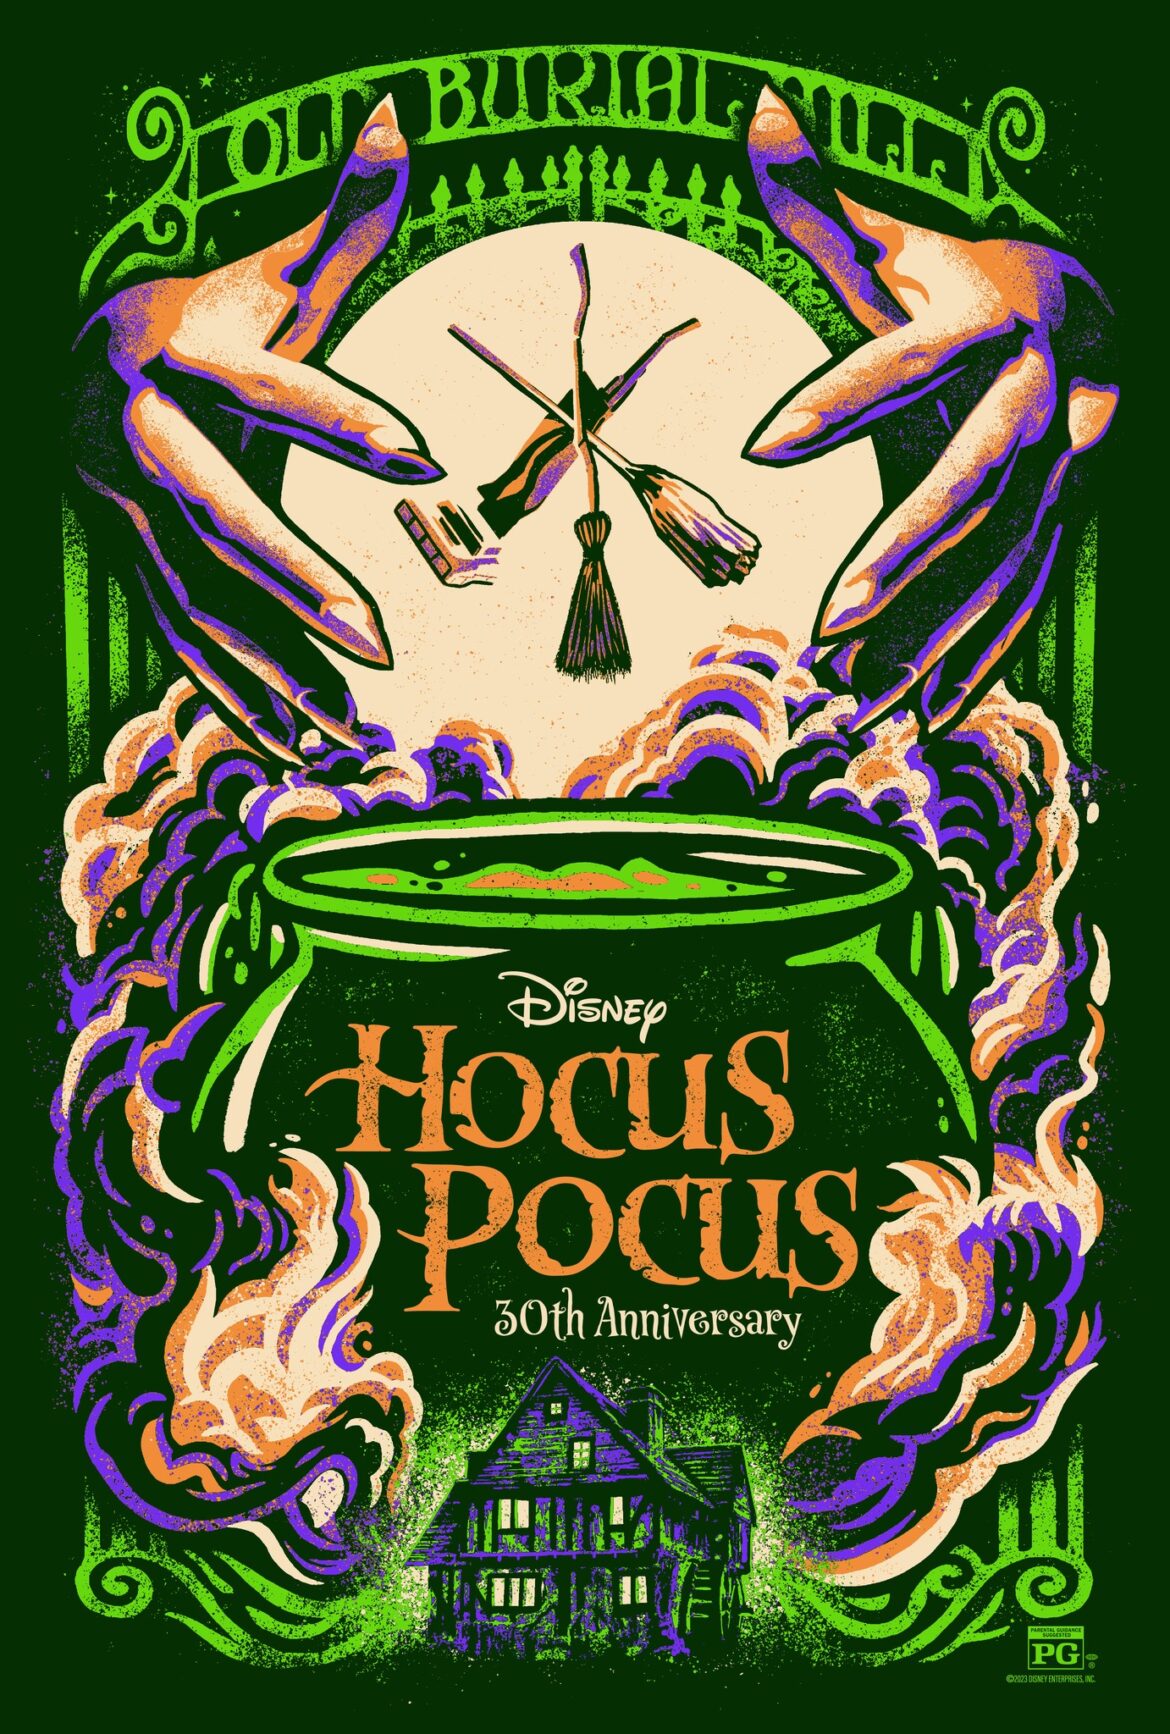 Hocus Pocus Returns to Theaters for a Limited Time